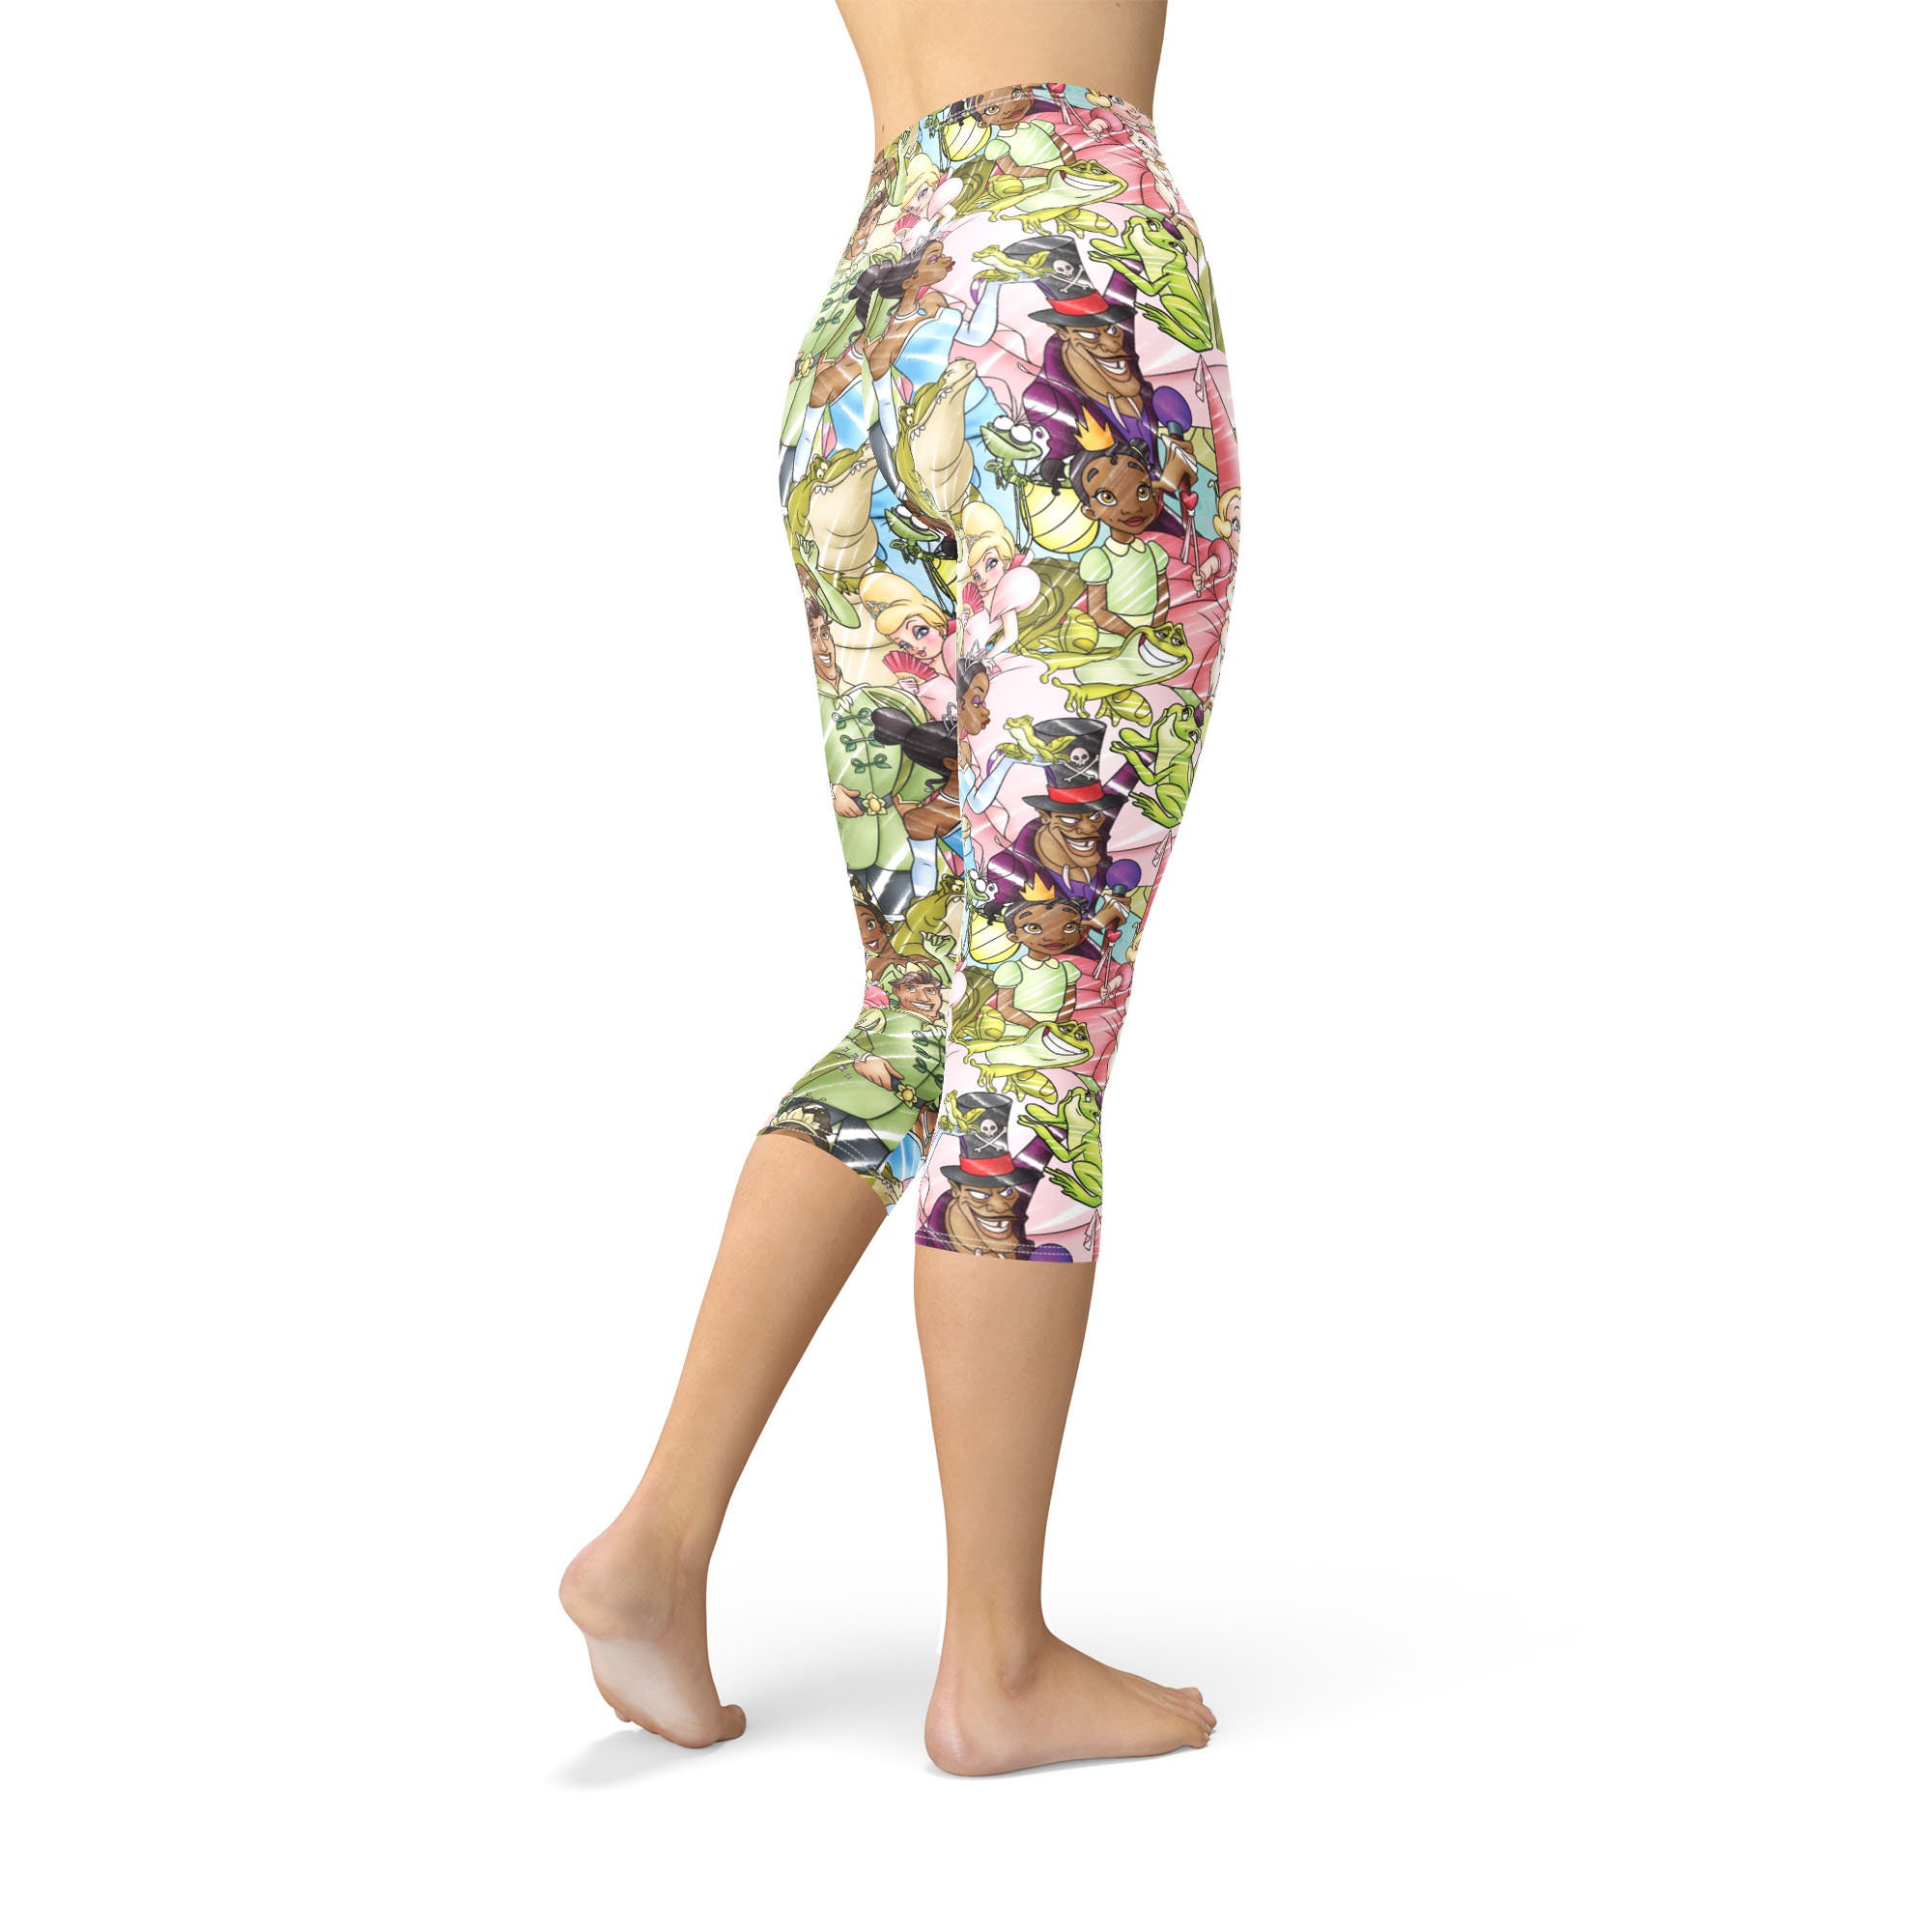 Princess & the Frog Sketched Theme Park Inspired Leggings in Capri or Full  Length, Sports Yoga Winter Styles in Sizes XS 5XL -  Canada